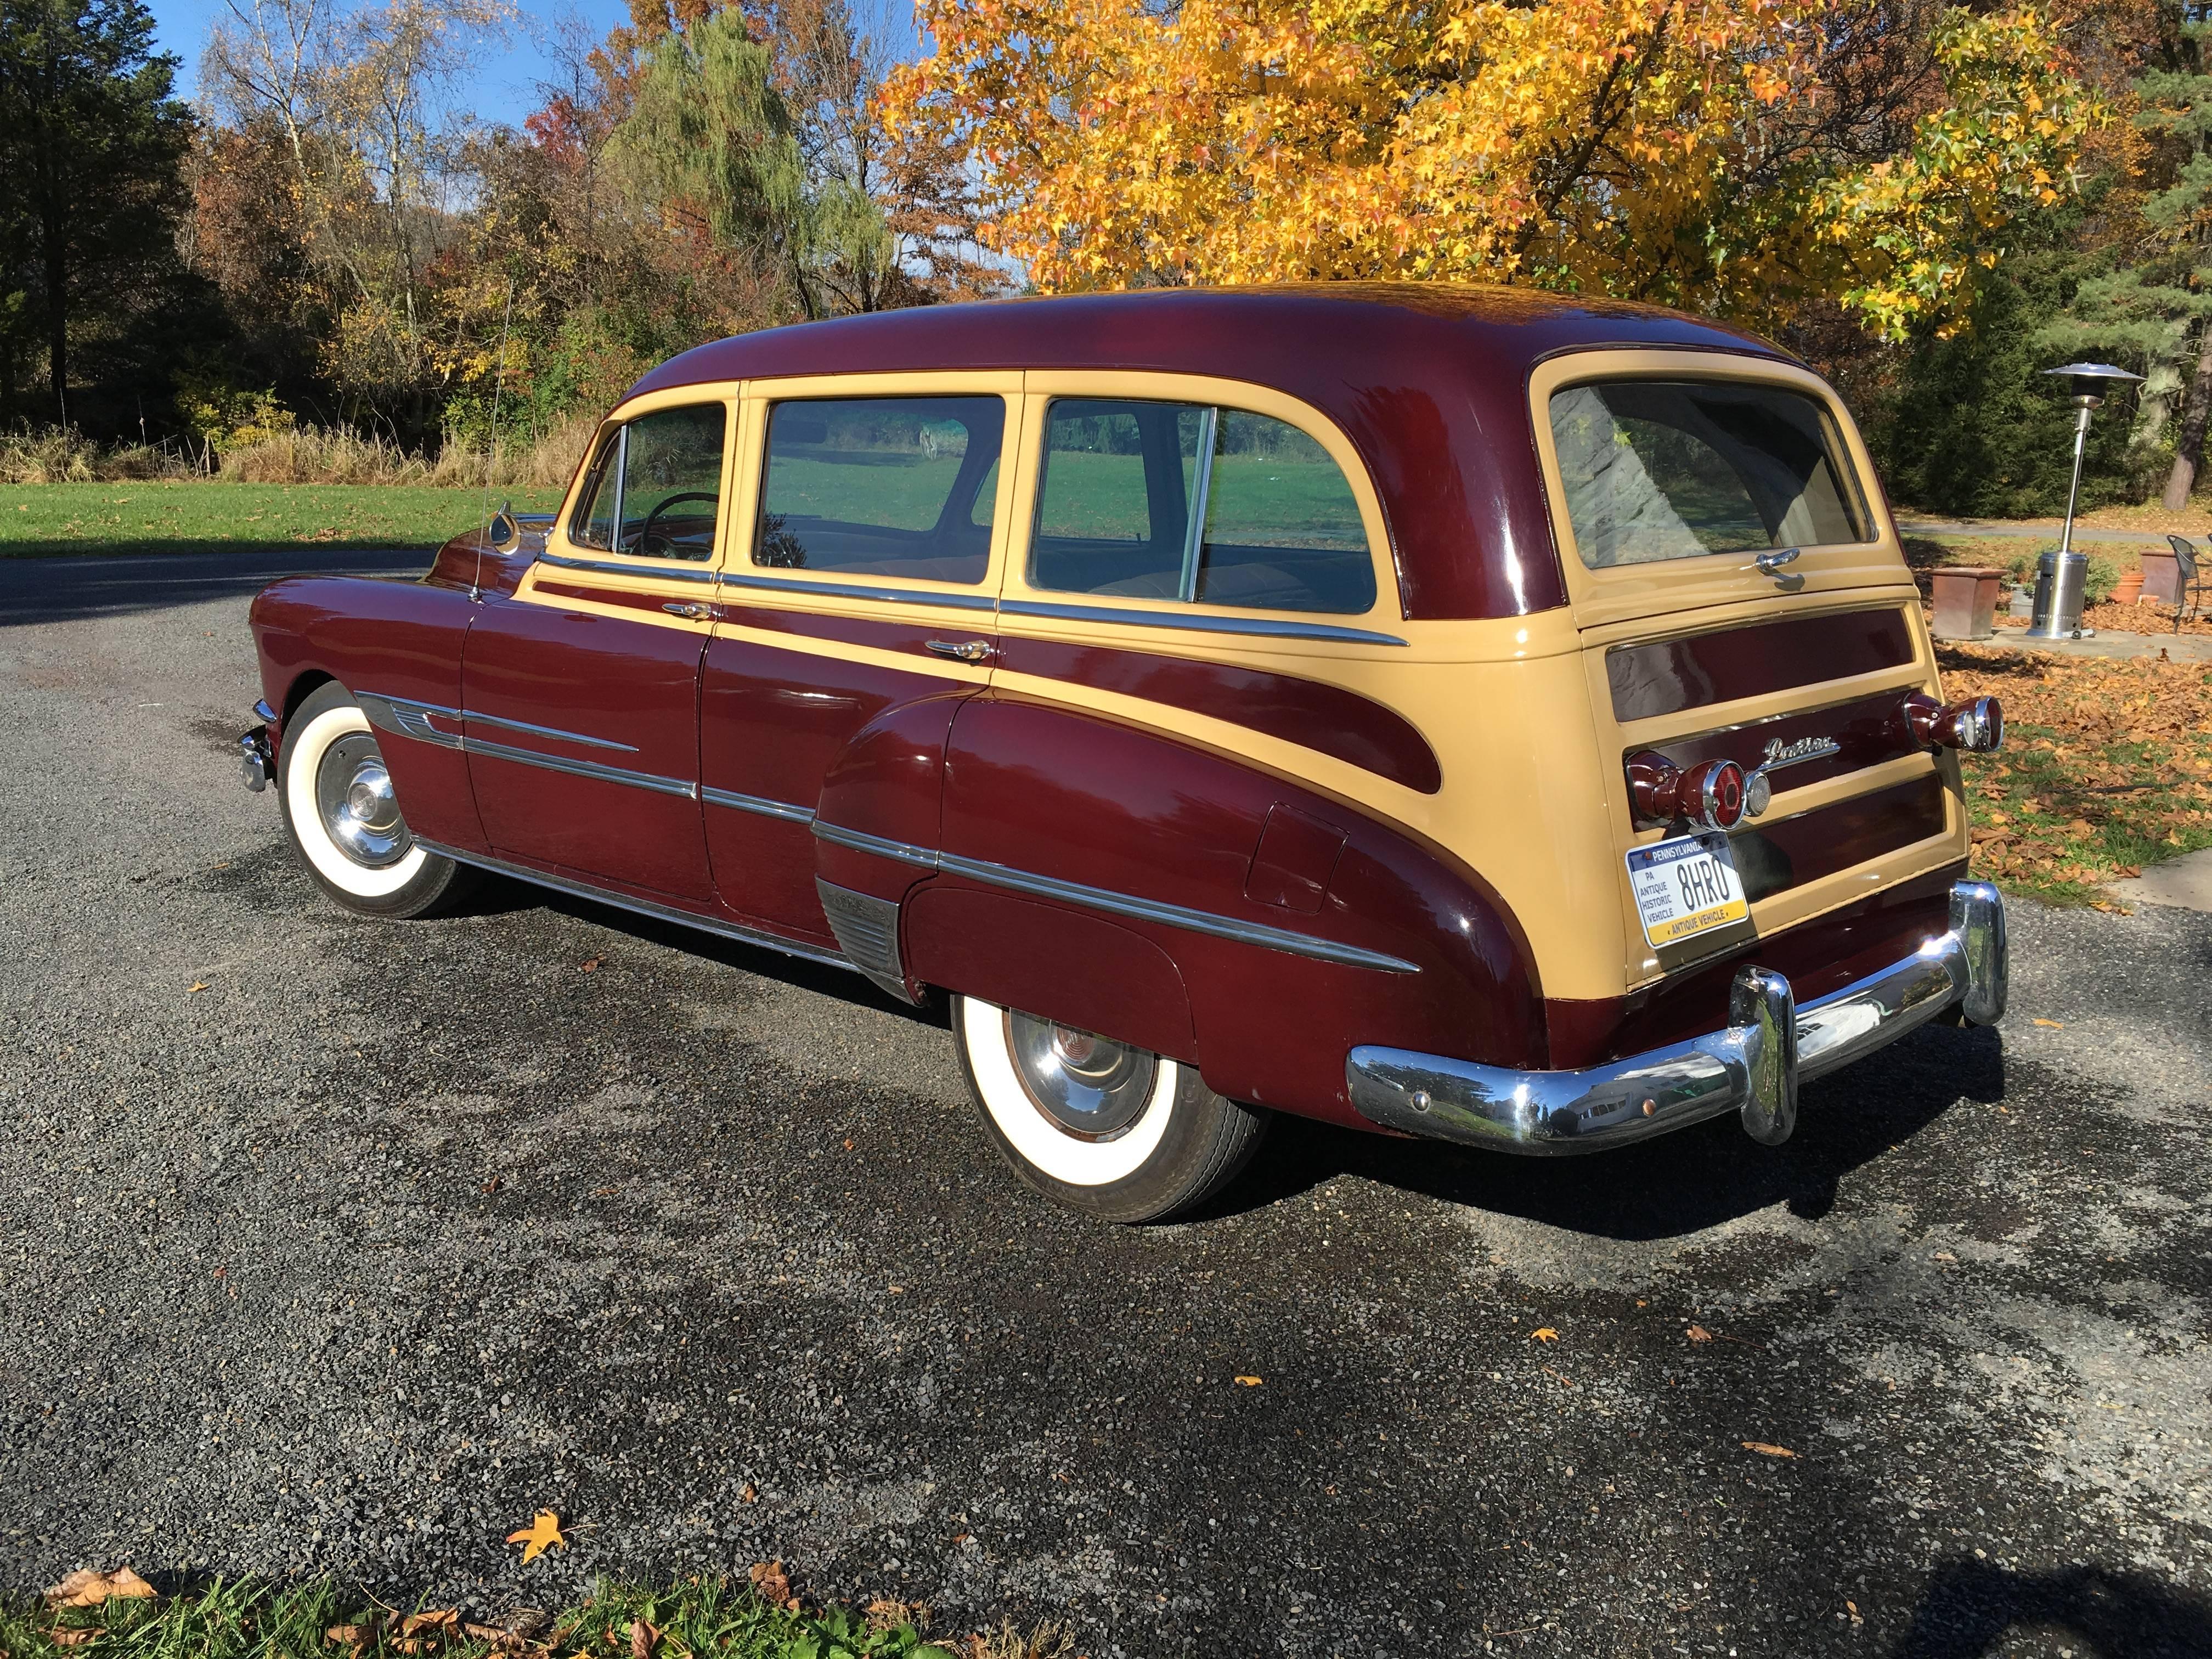 Classic Pontiac Chieftain Deluxe Wagon, 1952 In Excellent Condition In Doylestown, PA